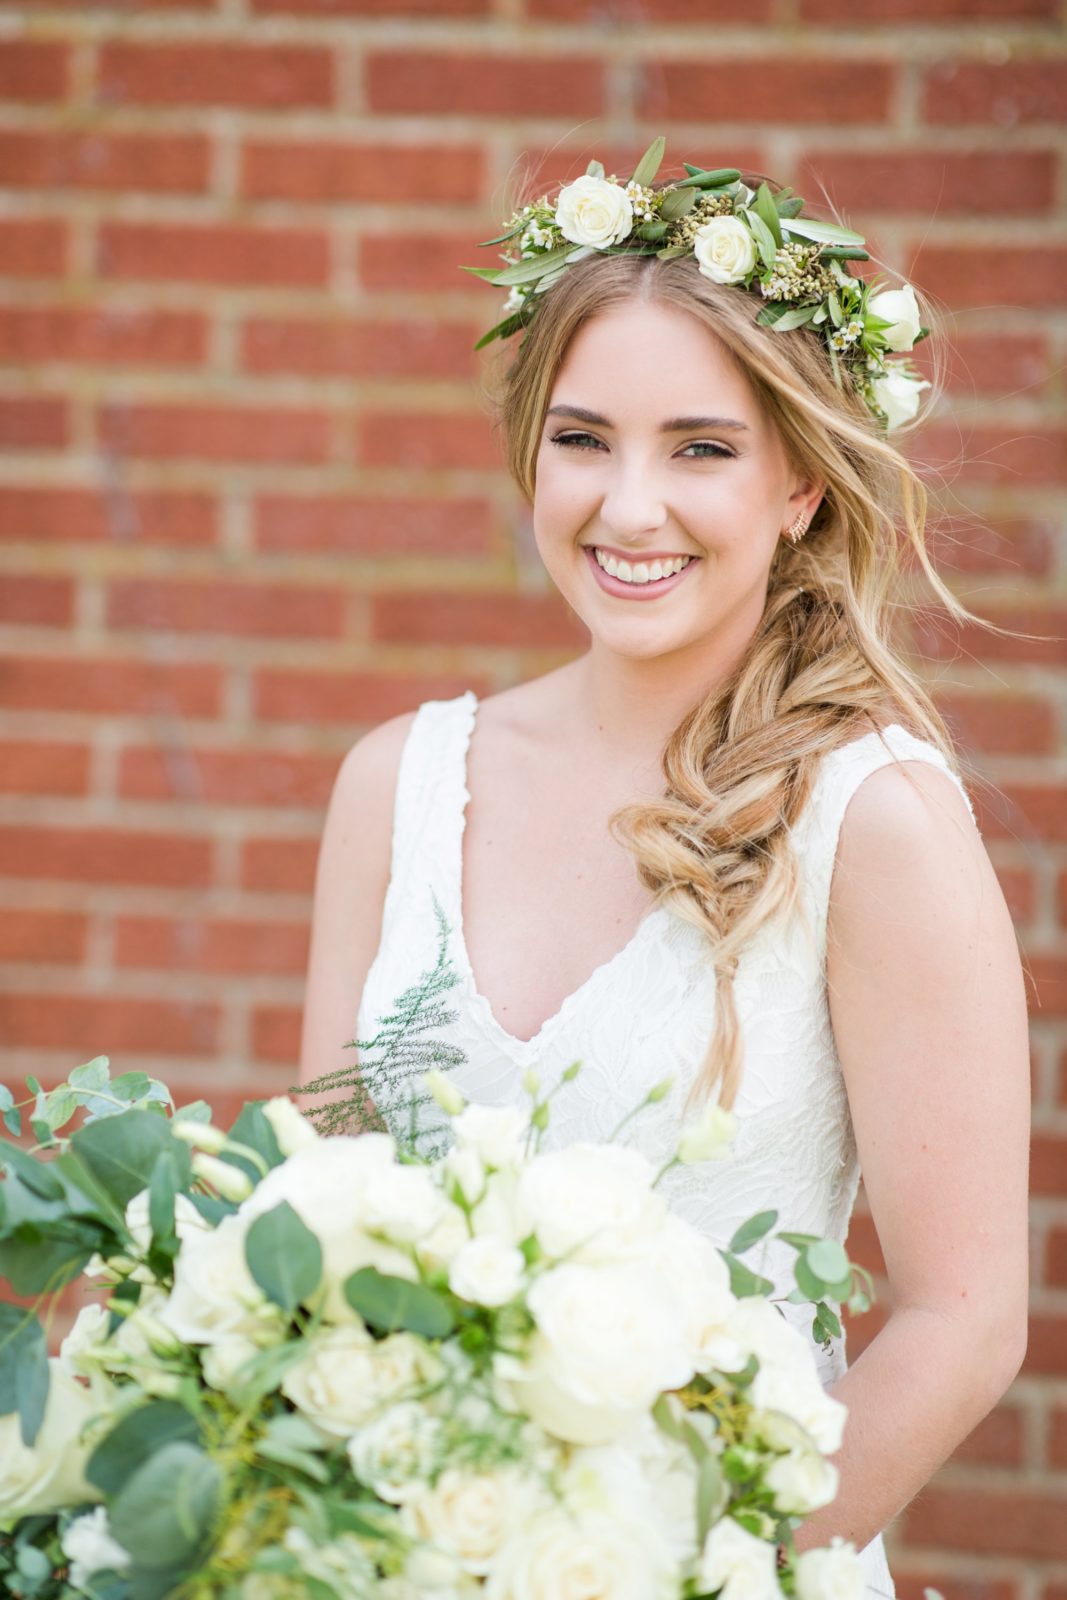 Modern Ivory & Taupe Wedding with Greenery | Pickwick Place, Bucyrus OH ...